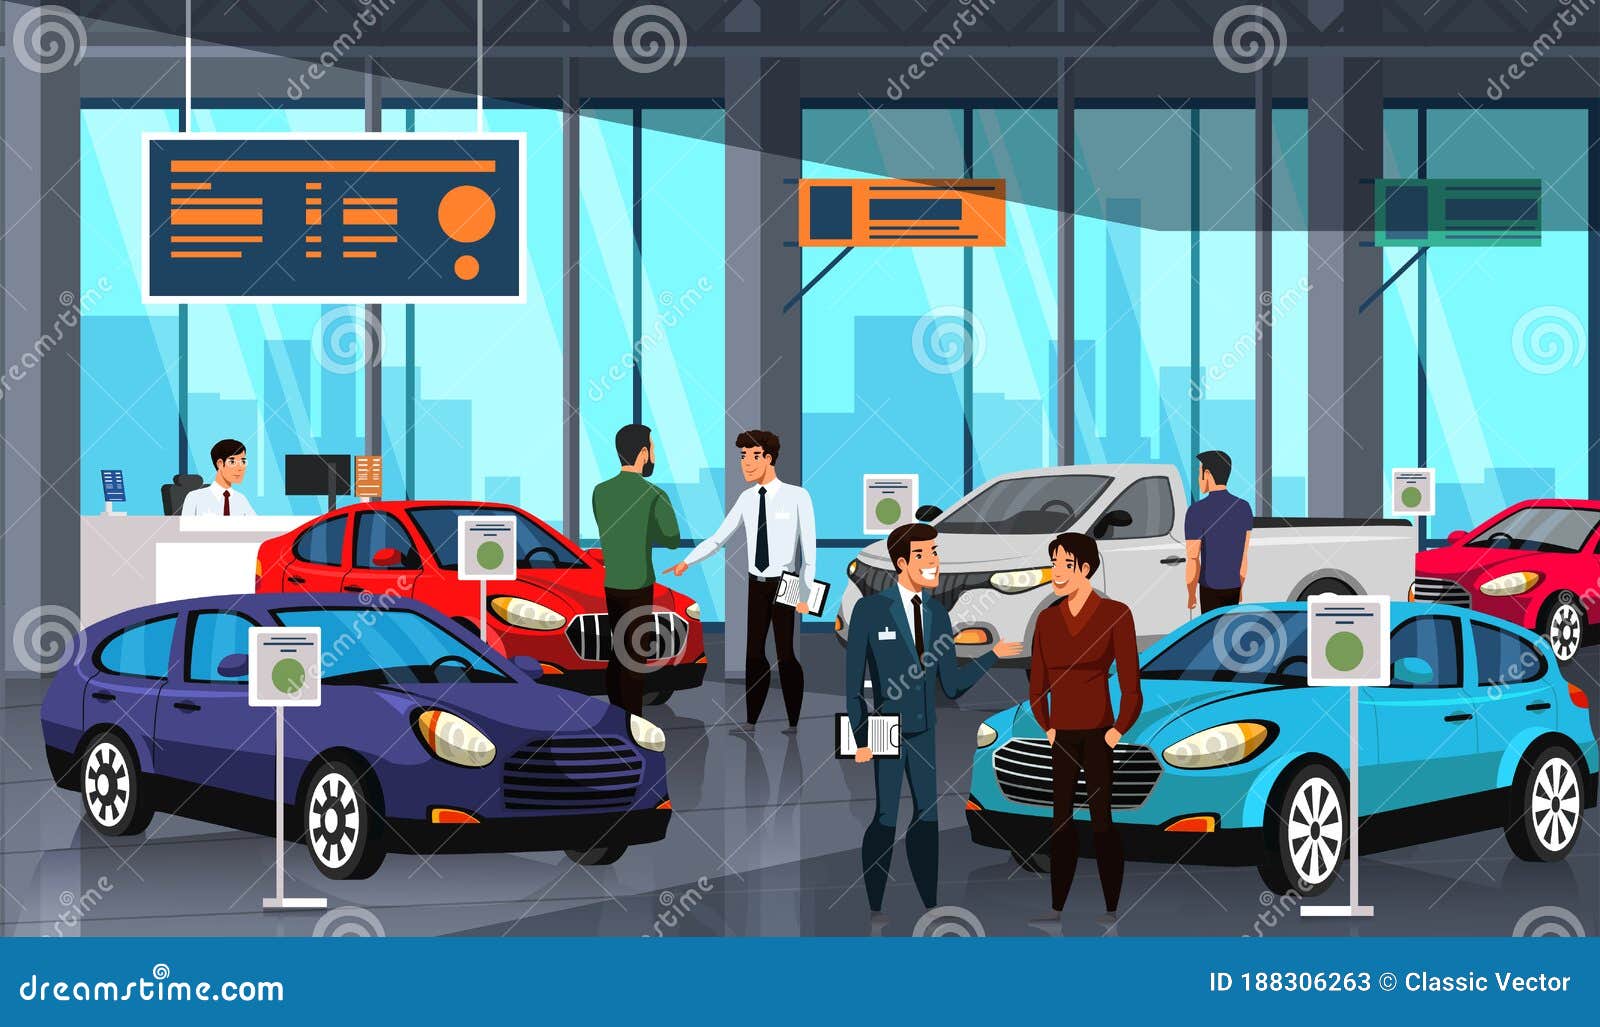 sellers and potential buyers group in car showroom